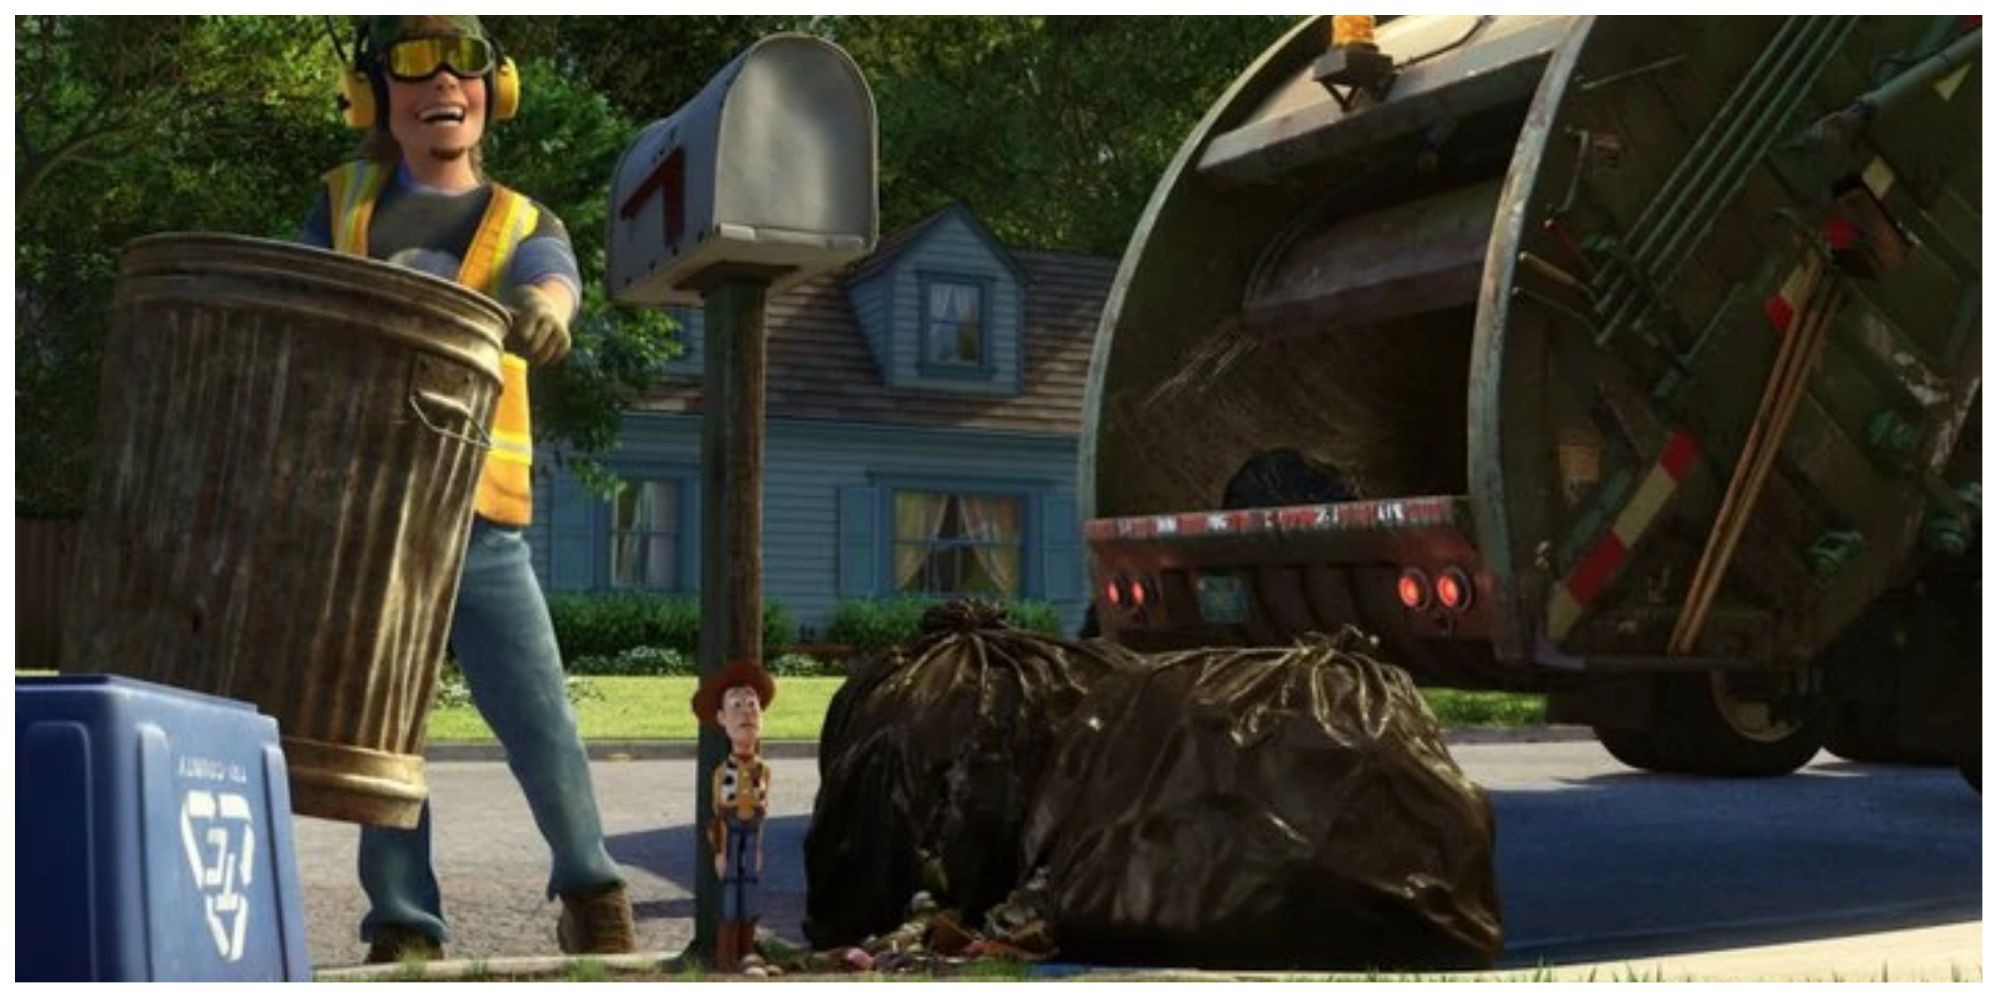 Sid Phillips as a garbage man in Toy Story 3